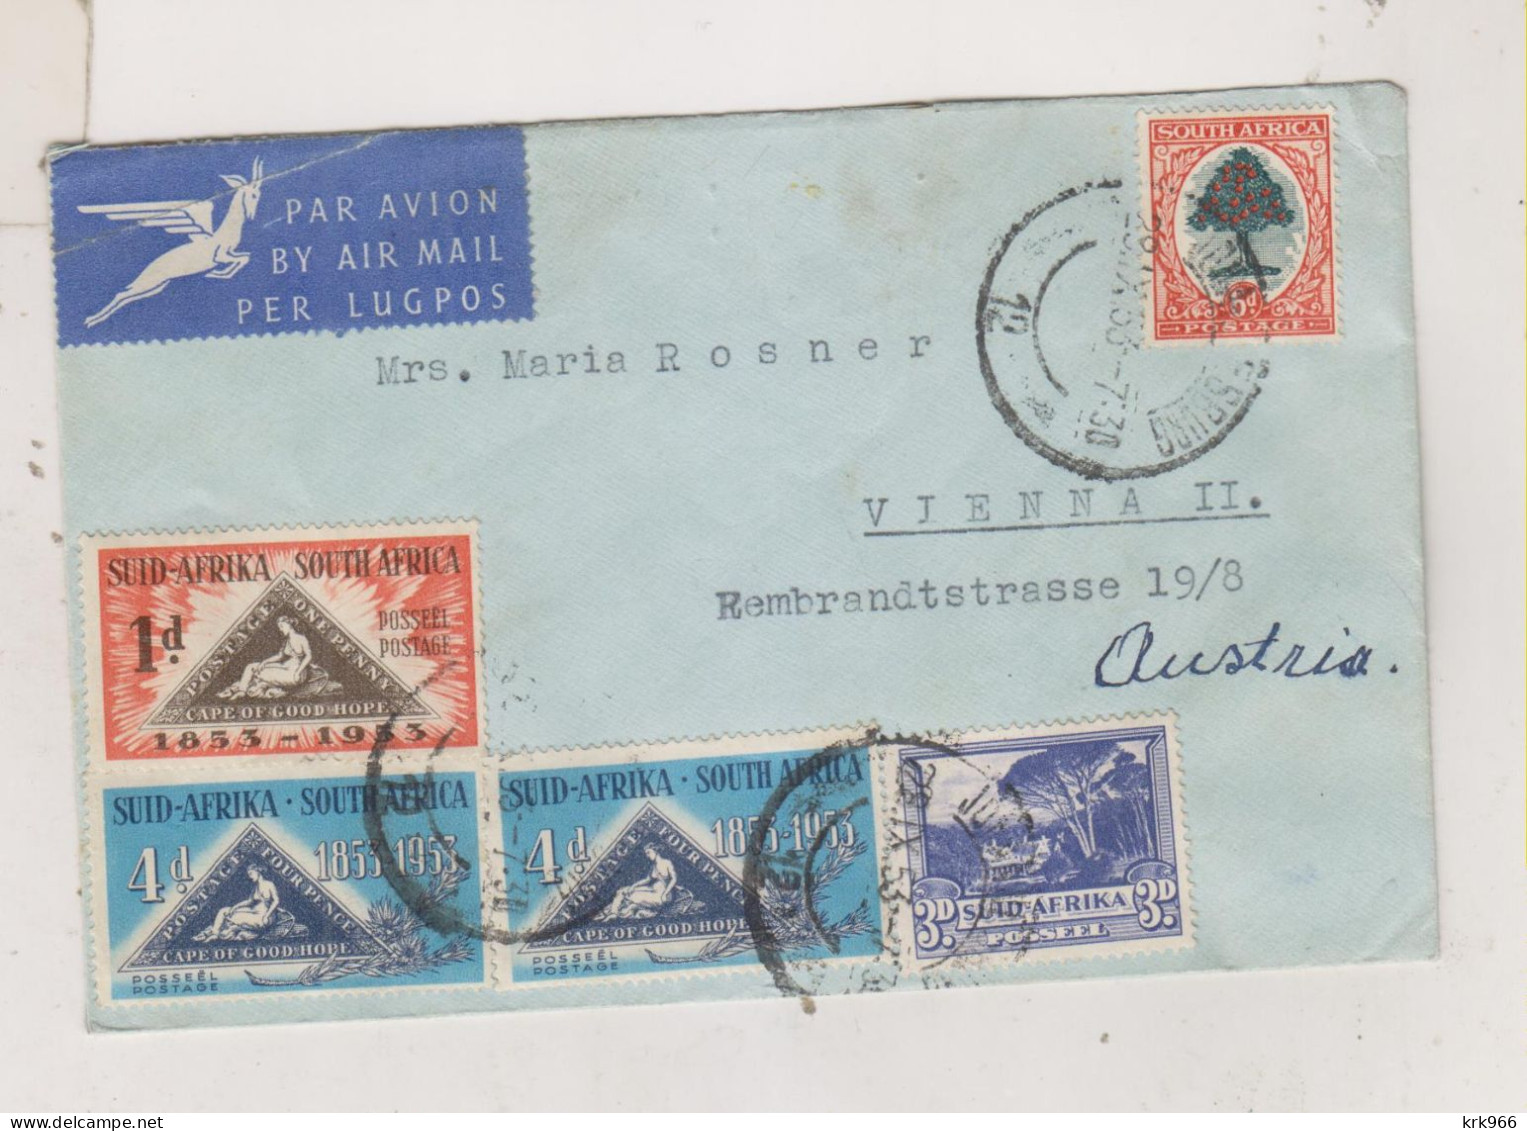 SOUTH AFRICA 1953 JOHANNESBURG  Nice   Airmail Cover To Austria - Airmail